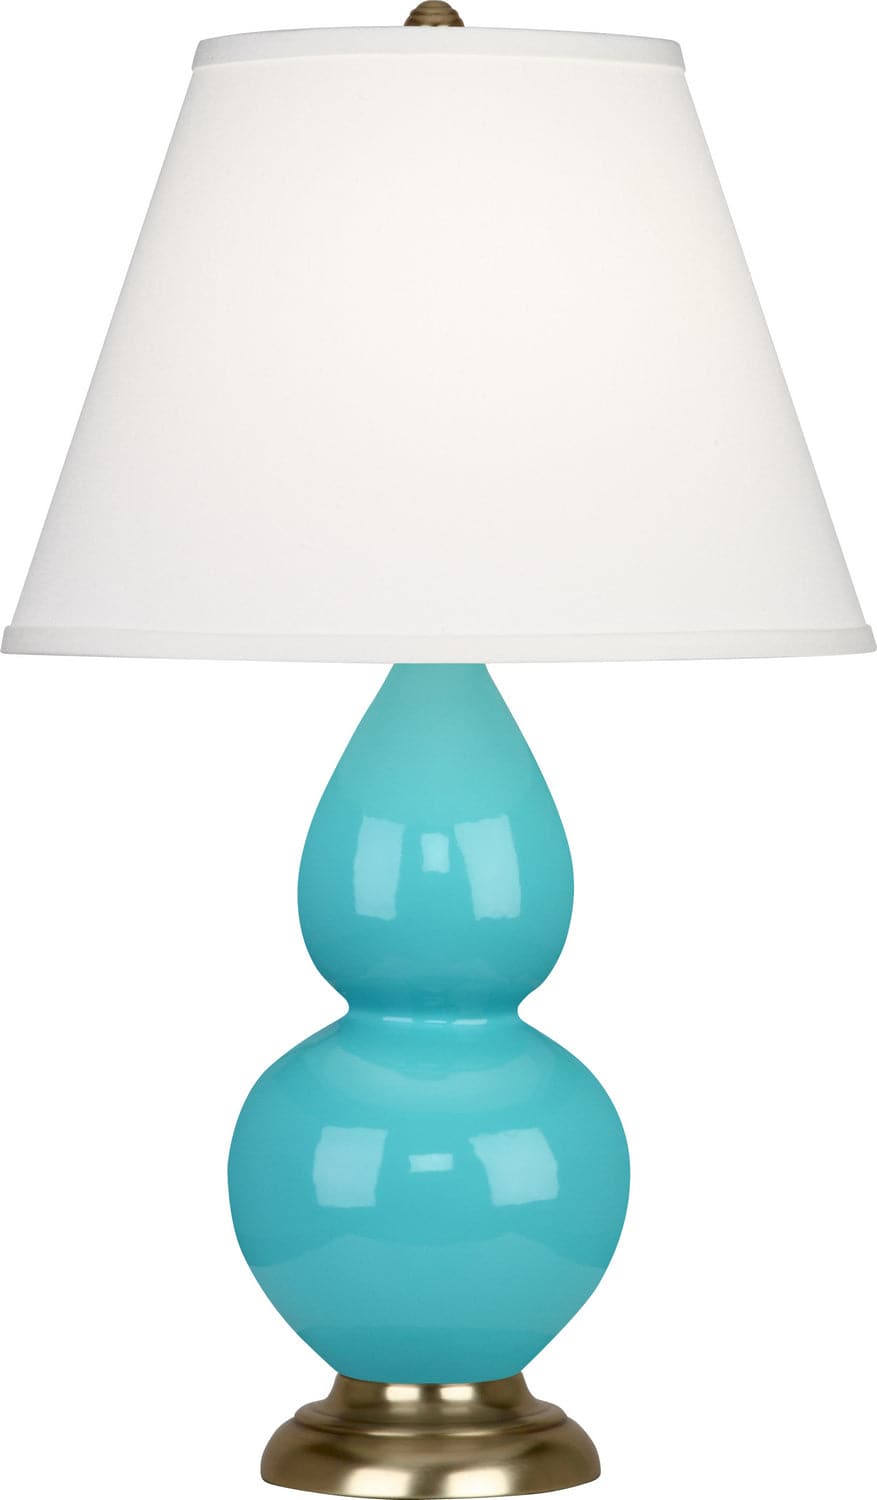 Robert Abbey - 1741X - One Light Table Lamp - Double Gourd - Egg Blue Glazed w/Antique Silver